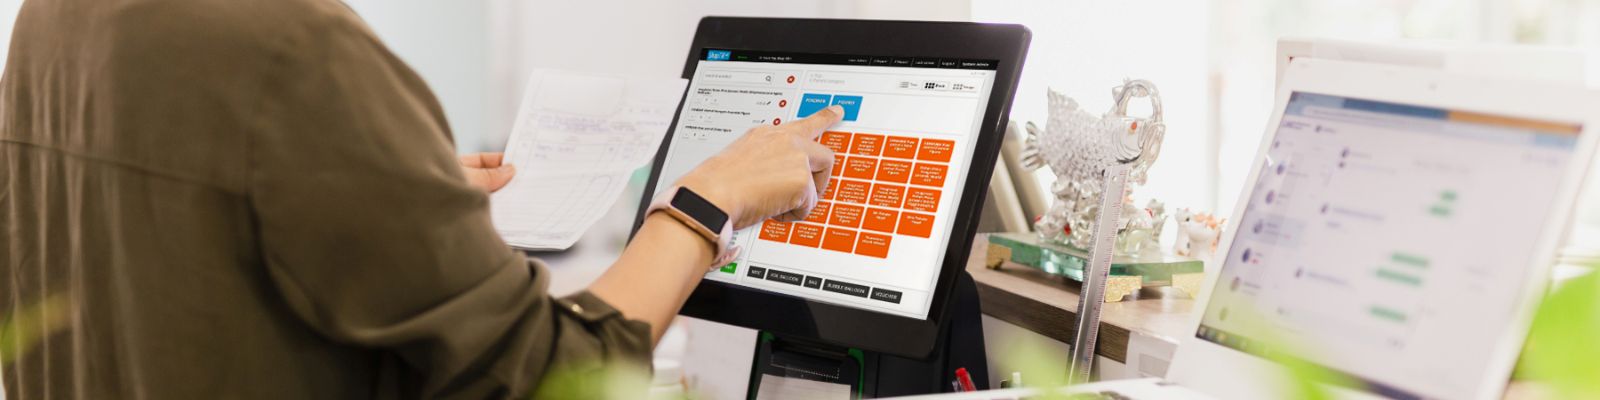 Key indicators your retail business needs a modern POS system to thrive